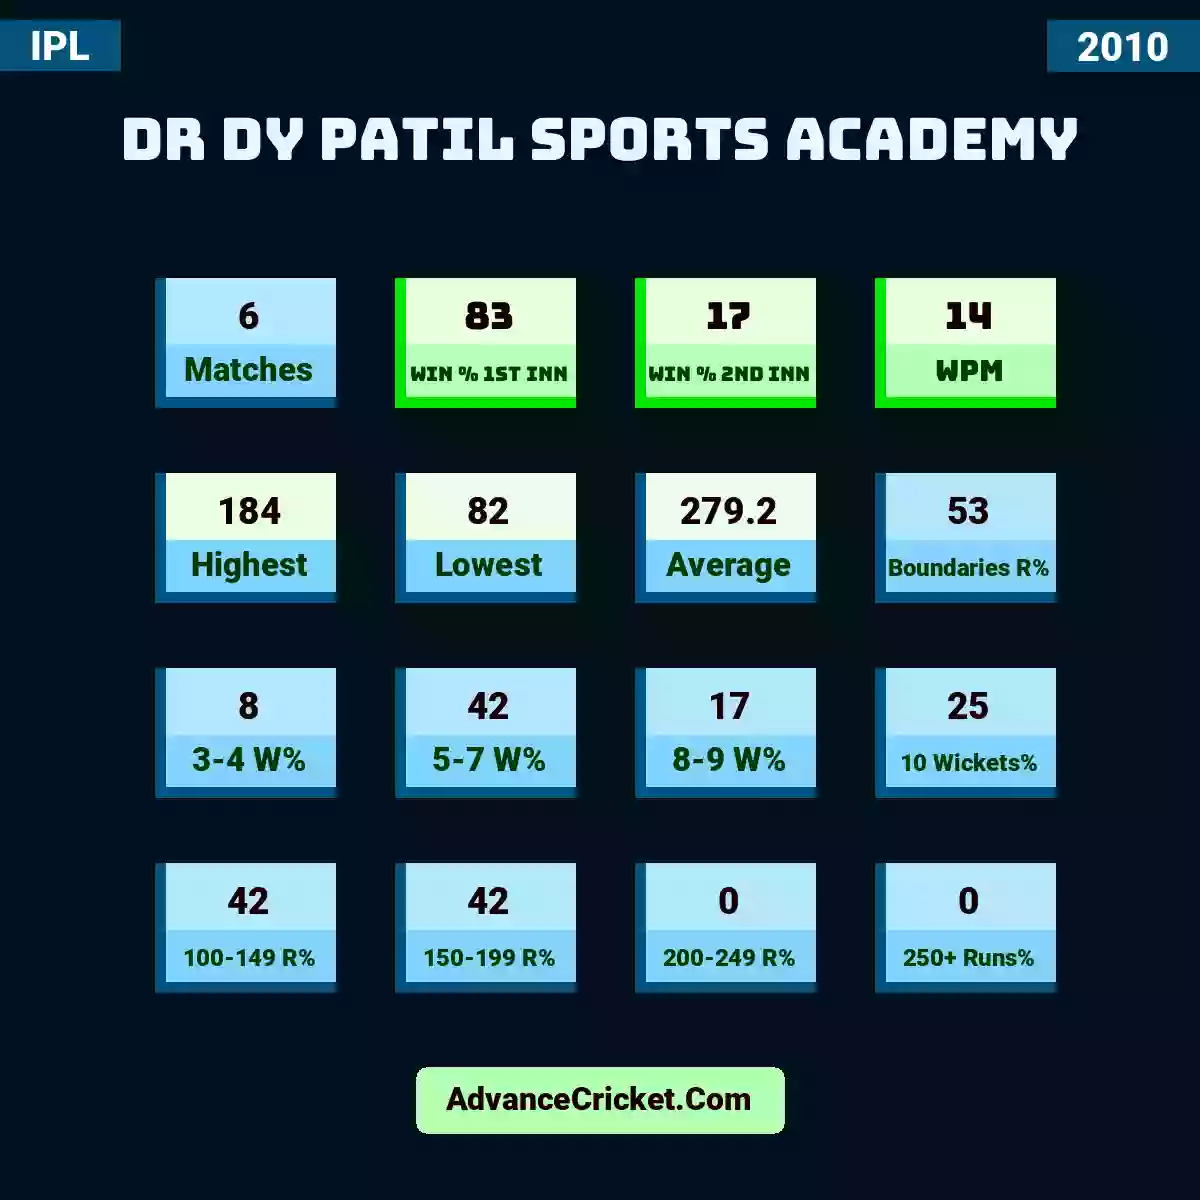 Image showing Dr DY Patil Sports Academy with Matches: 6, Win % 1st Inn: 83, Win % 2nd Inn: 17, WPM: 14, Highest: 184, Lowest: 82, Average: 279.2, Boundaries R%: 53, 3-4 W%: 8, 5-7 W%: 42, 8-9 W%: 17, 10 Wickets%: 25, 100-149 R%: 42, 150-199 R%: 42, 200-249 R%: 0, 250+ Runs%: 0.